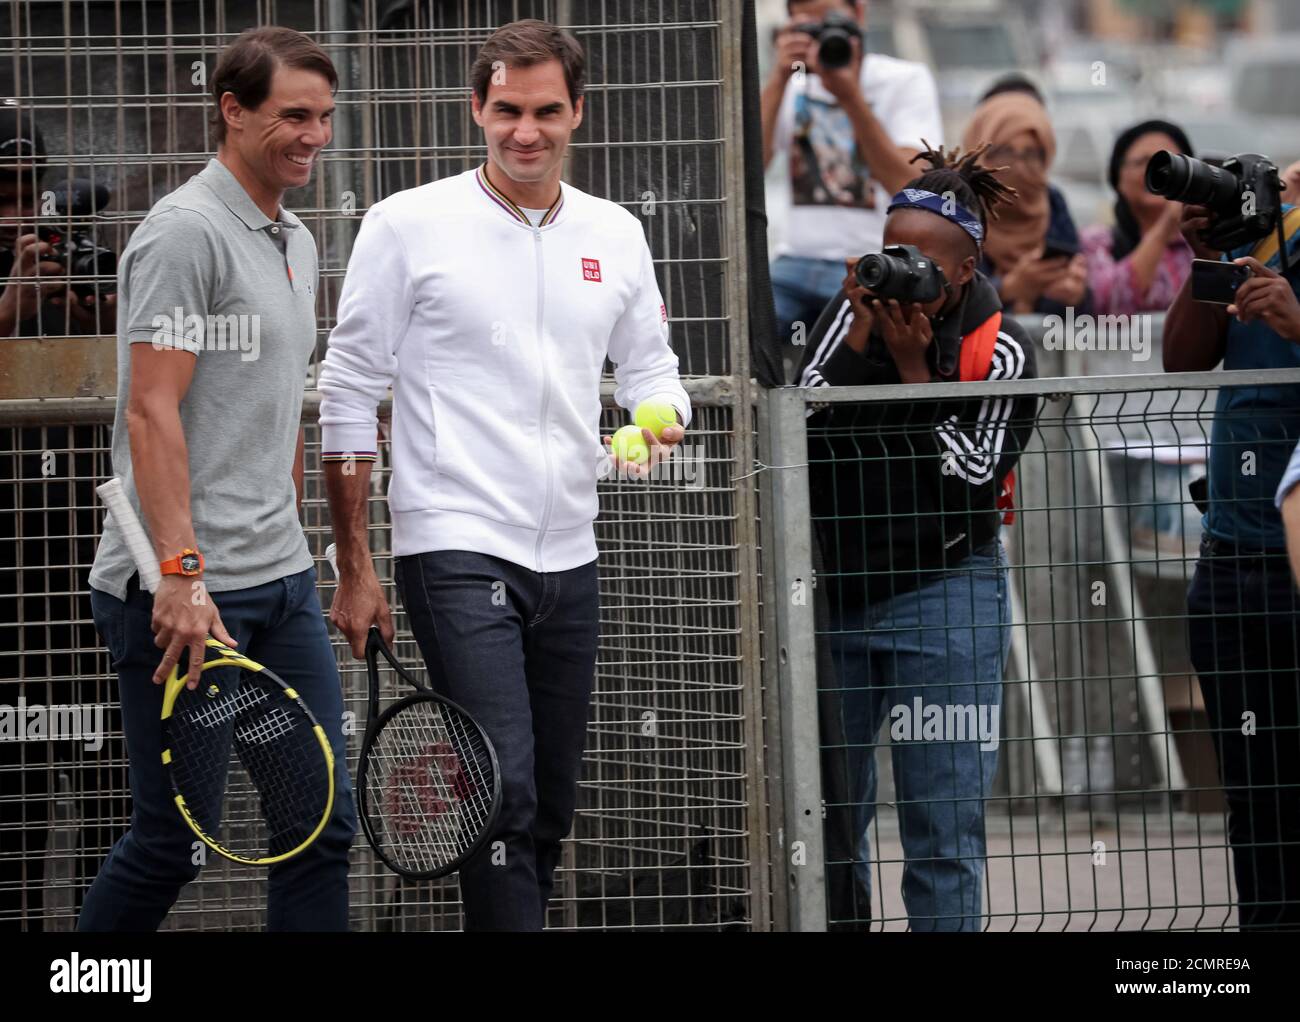 Roger Federer and Rafael Nadal arrive for a photo session ahead of their " Match in Africa" exhibition tennis match in Cape Town, South Africa,  February 7, 2020. REUTERS/Mike Hutchings Stock Photo - Alamy